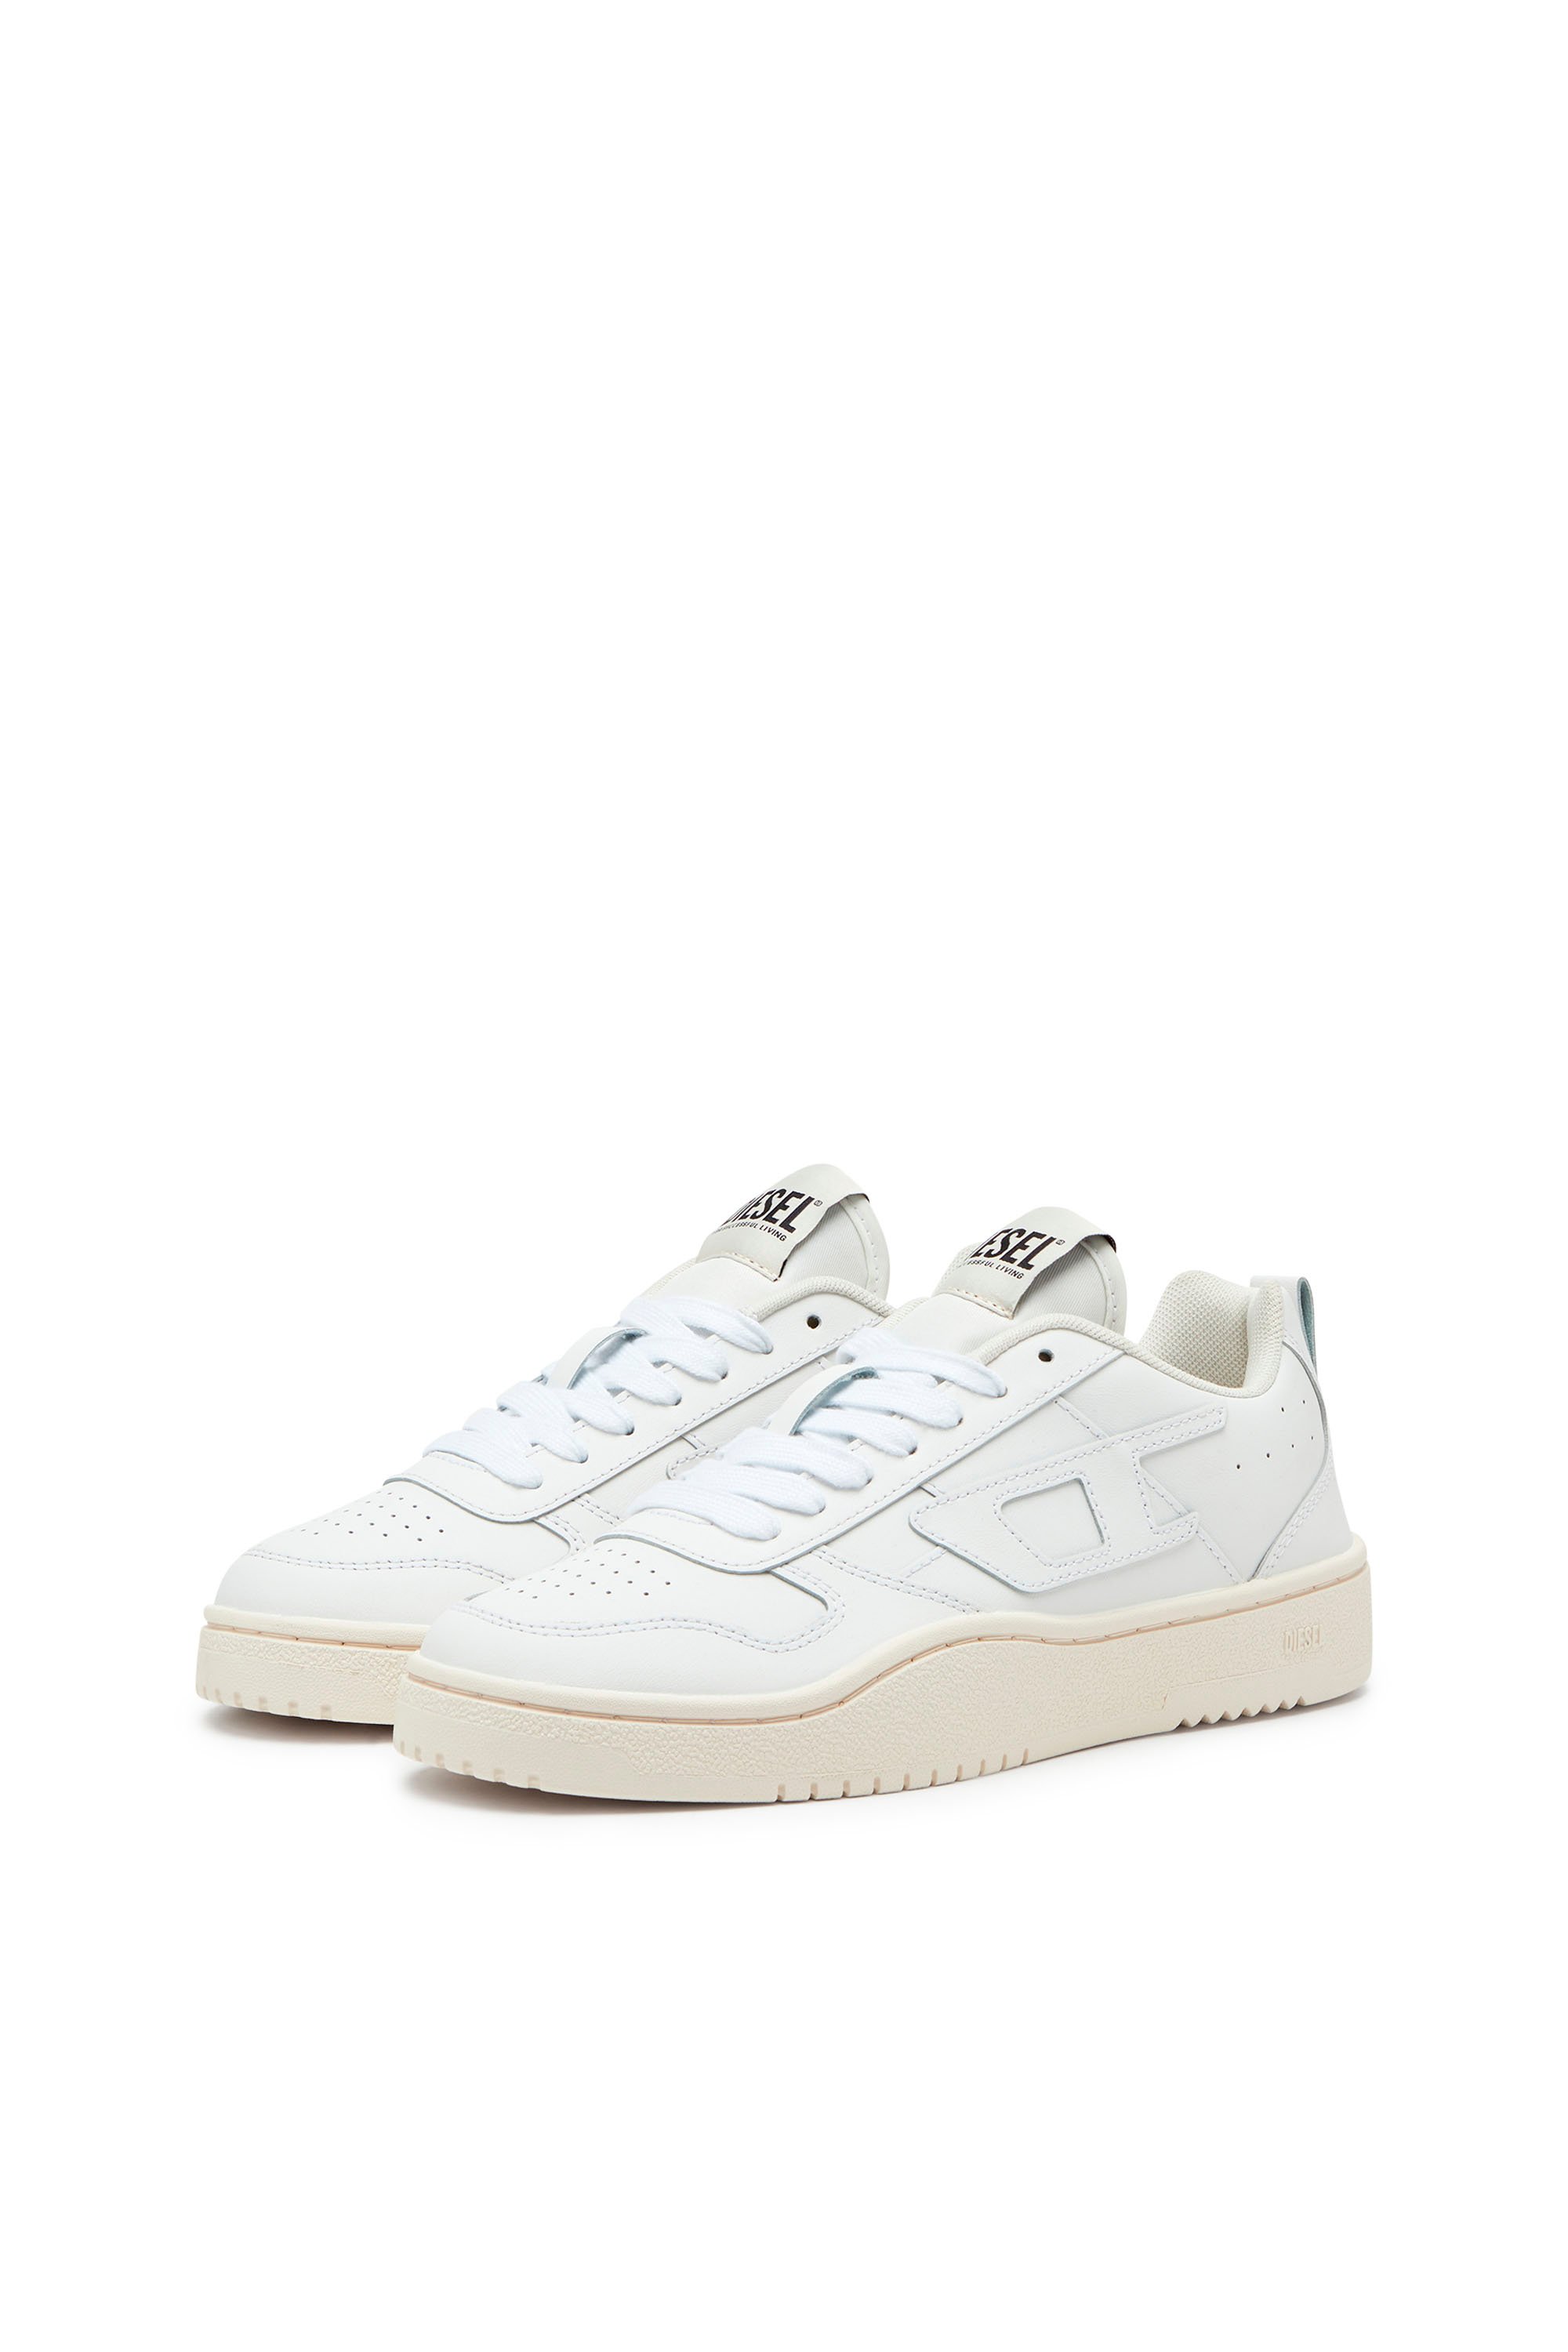 Diesel - S-UKIYO V2 LOW W, Woman S-Ukiyo Low-Low-top sneakers in leather and nylon in White - Image 8